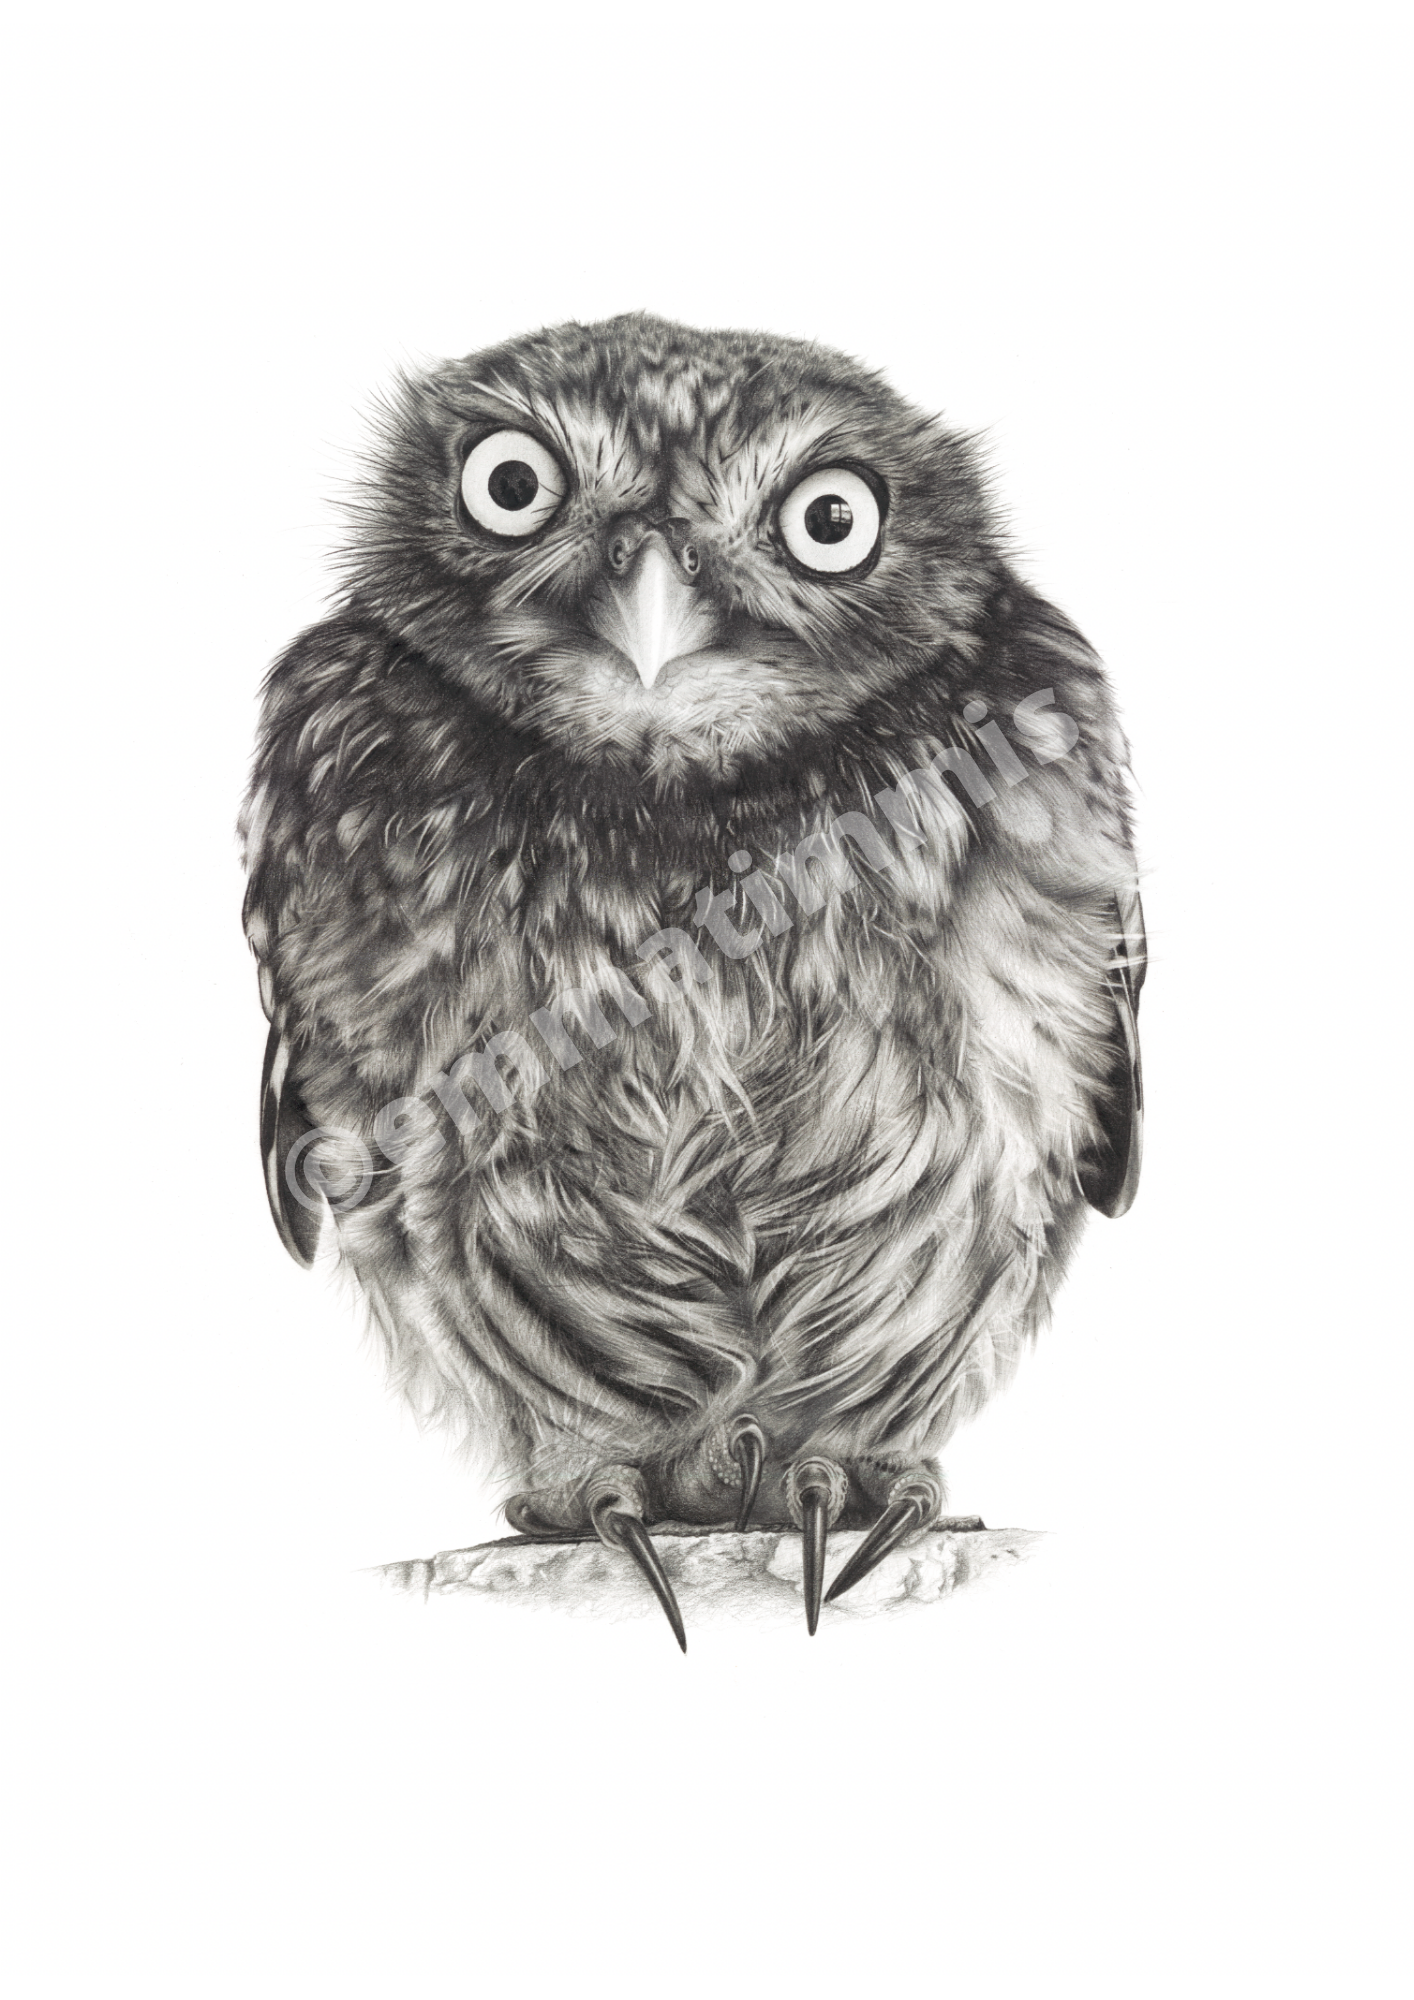 Cuddle Me Quick - Little Owl - Limited Edition Giclee Prints